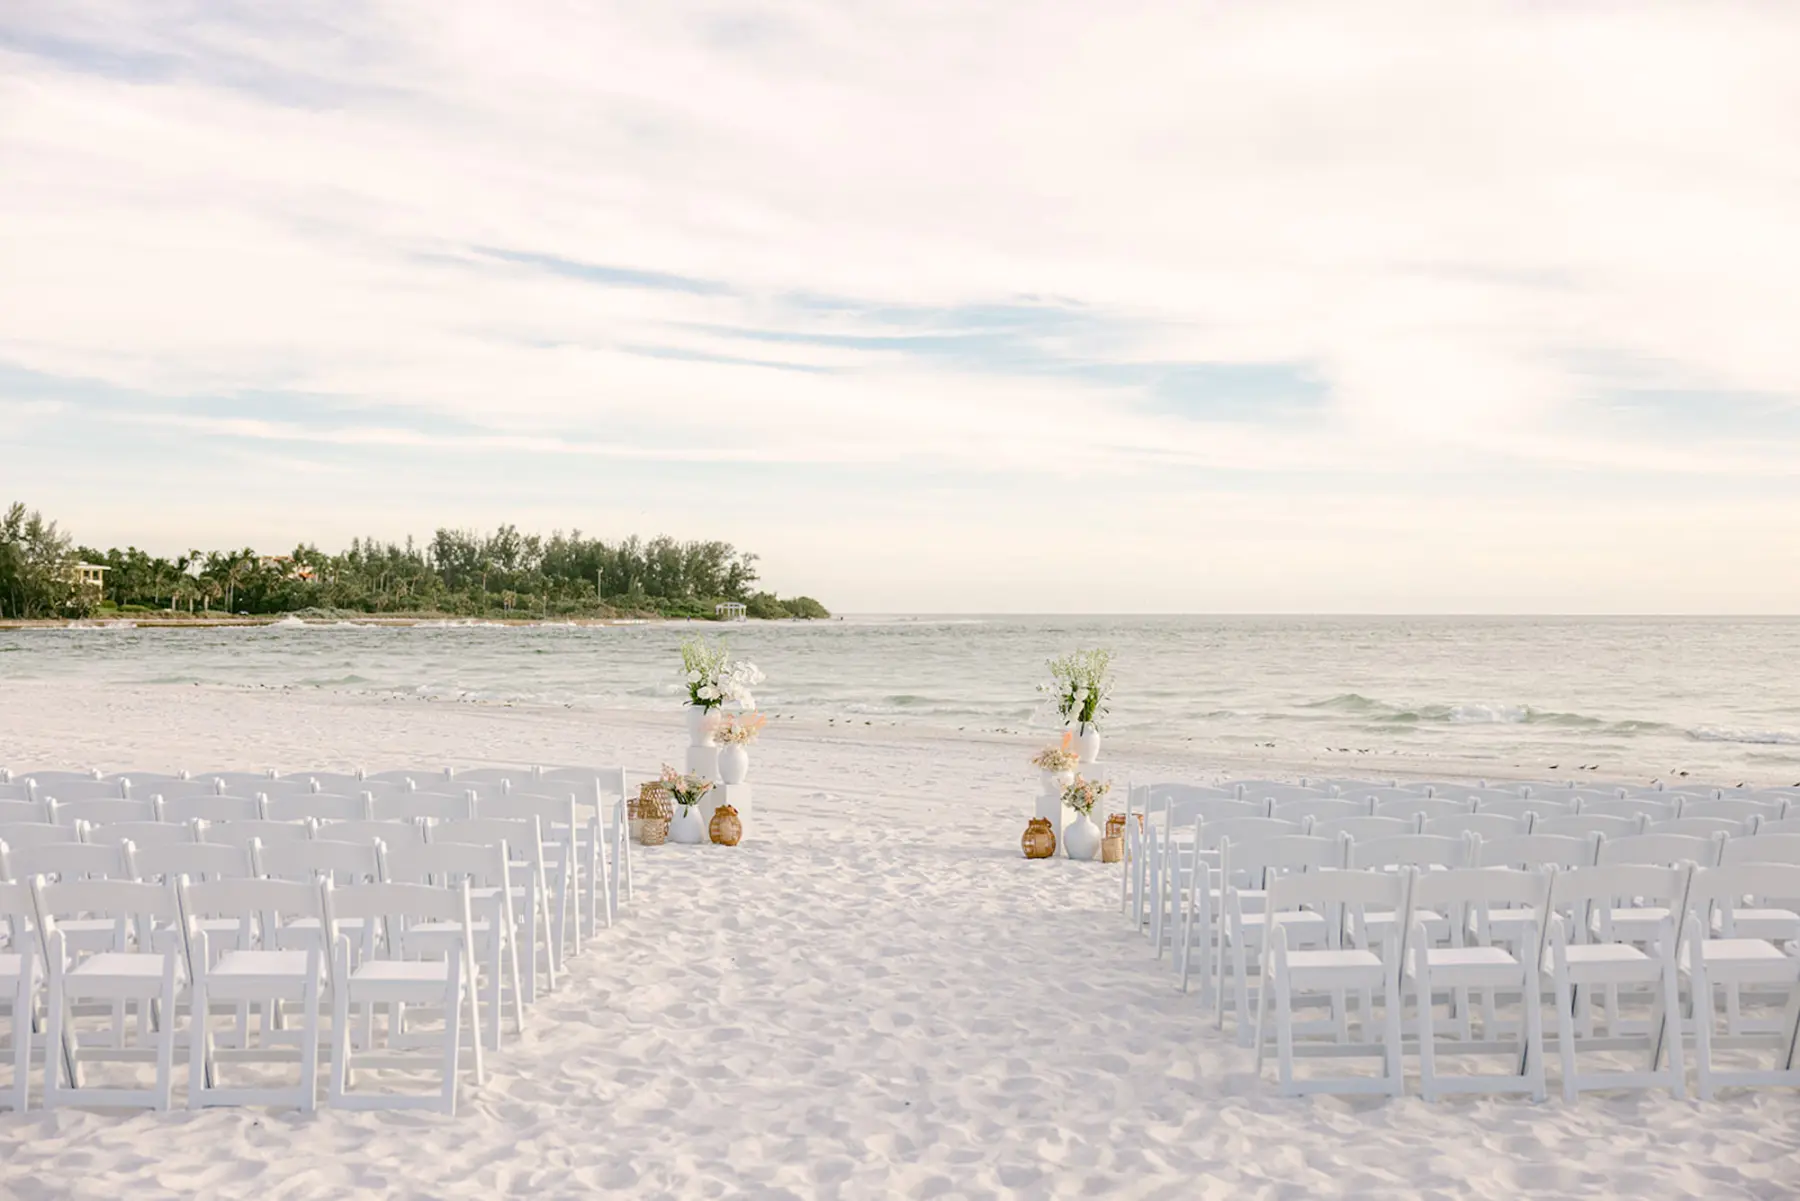 White and Pink Beach Wedding Ceremony Inspiration | White Folding Garden Chairs | Sarasota Waterfront Beach Venue The Resort at Longboat Key Club | Planner Elegant Affairs by Design